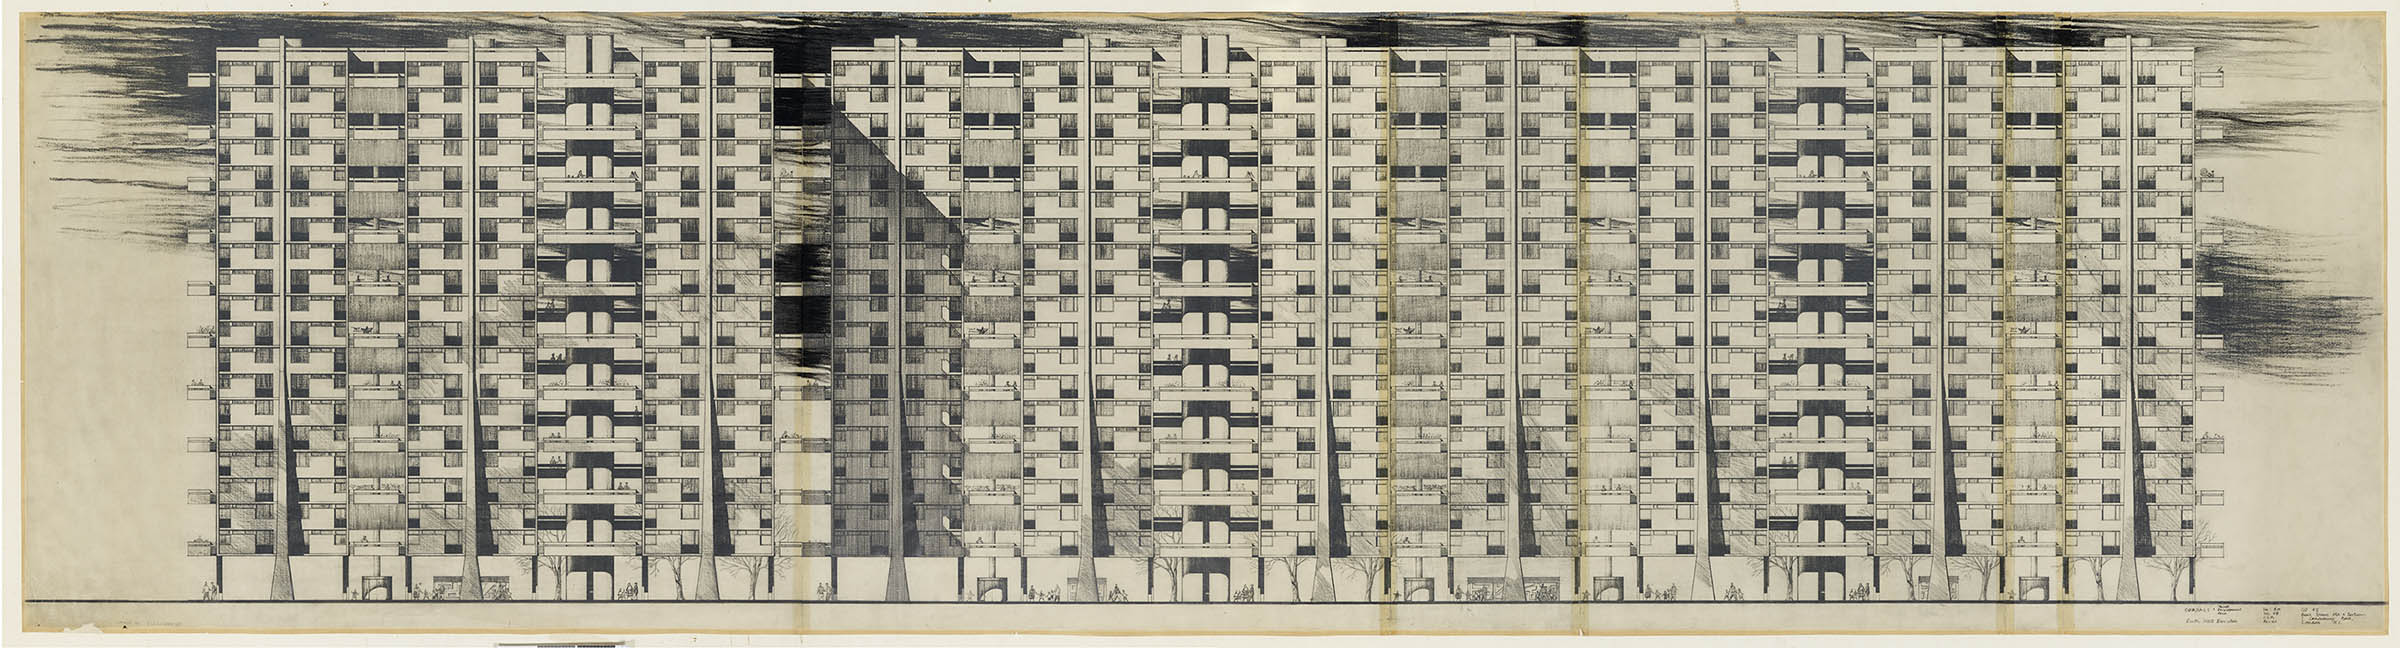 Plans for housing in 1960s Glasgow. The plans show 4 interconnected 10-storey tower blocks. There are many intricate details including would-be occupants of the flats shopping, gardening and hanging out laundry. 